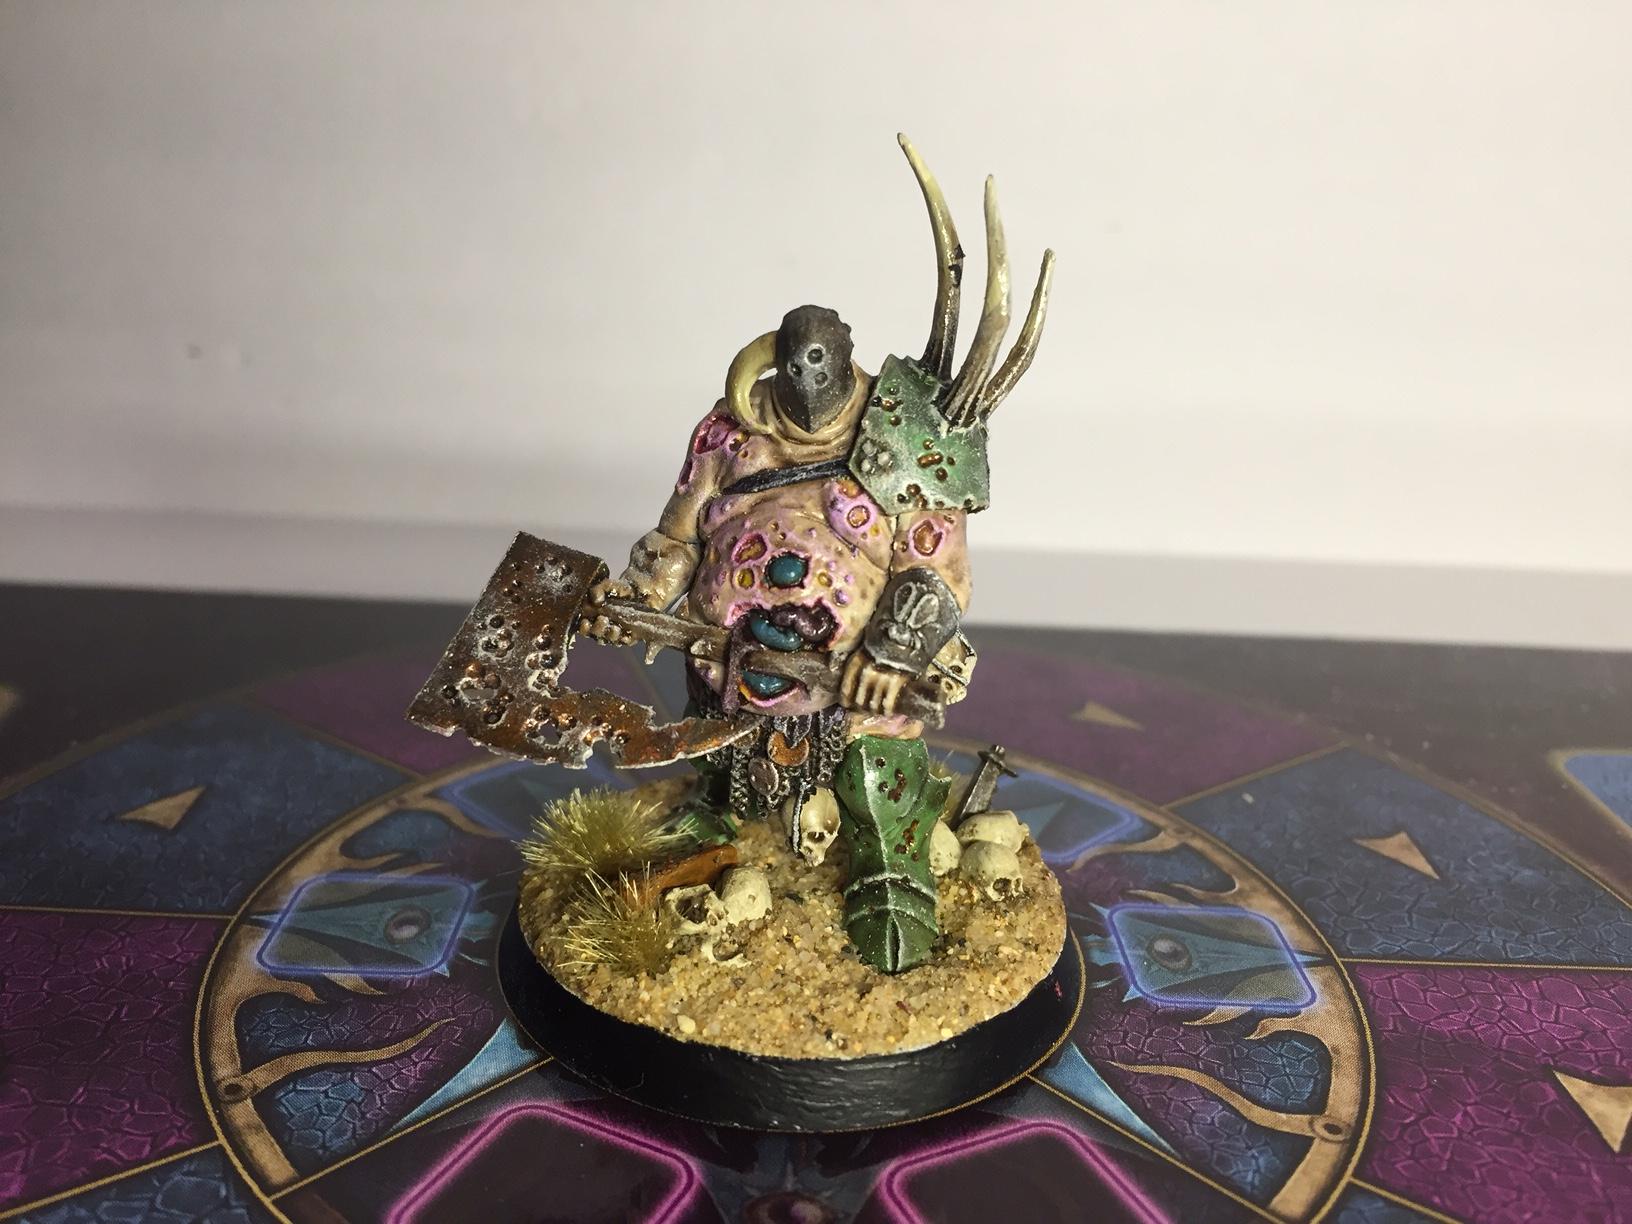 Age Of Sigmar, Chaos, Citadel Paints, Drybrush, Nurgle, Silver Tower, Warhammer Fantasy, Warhammer Quest